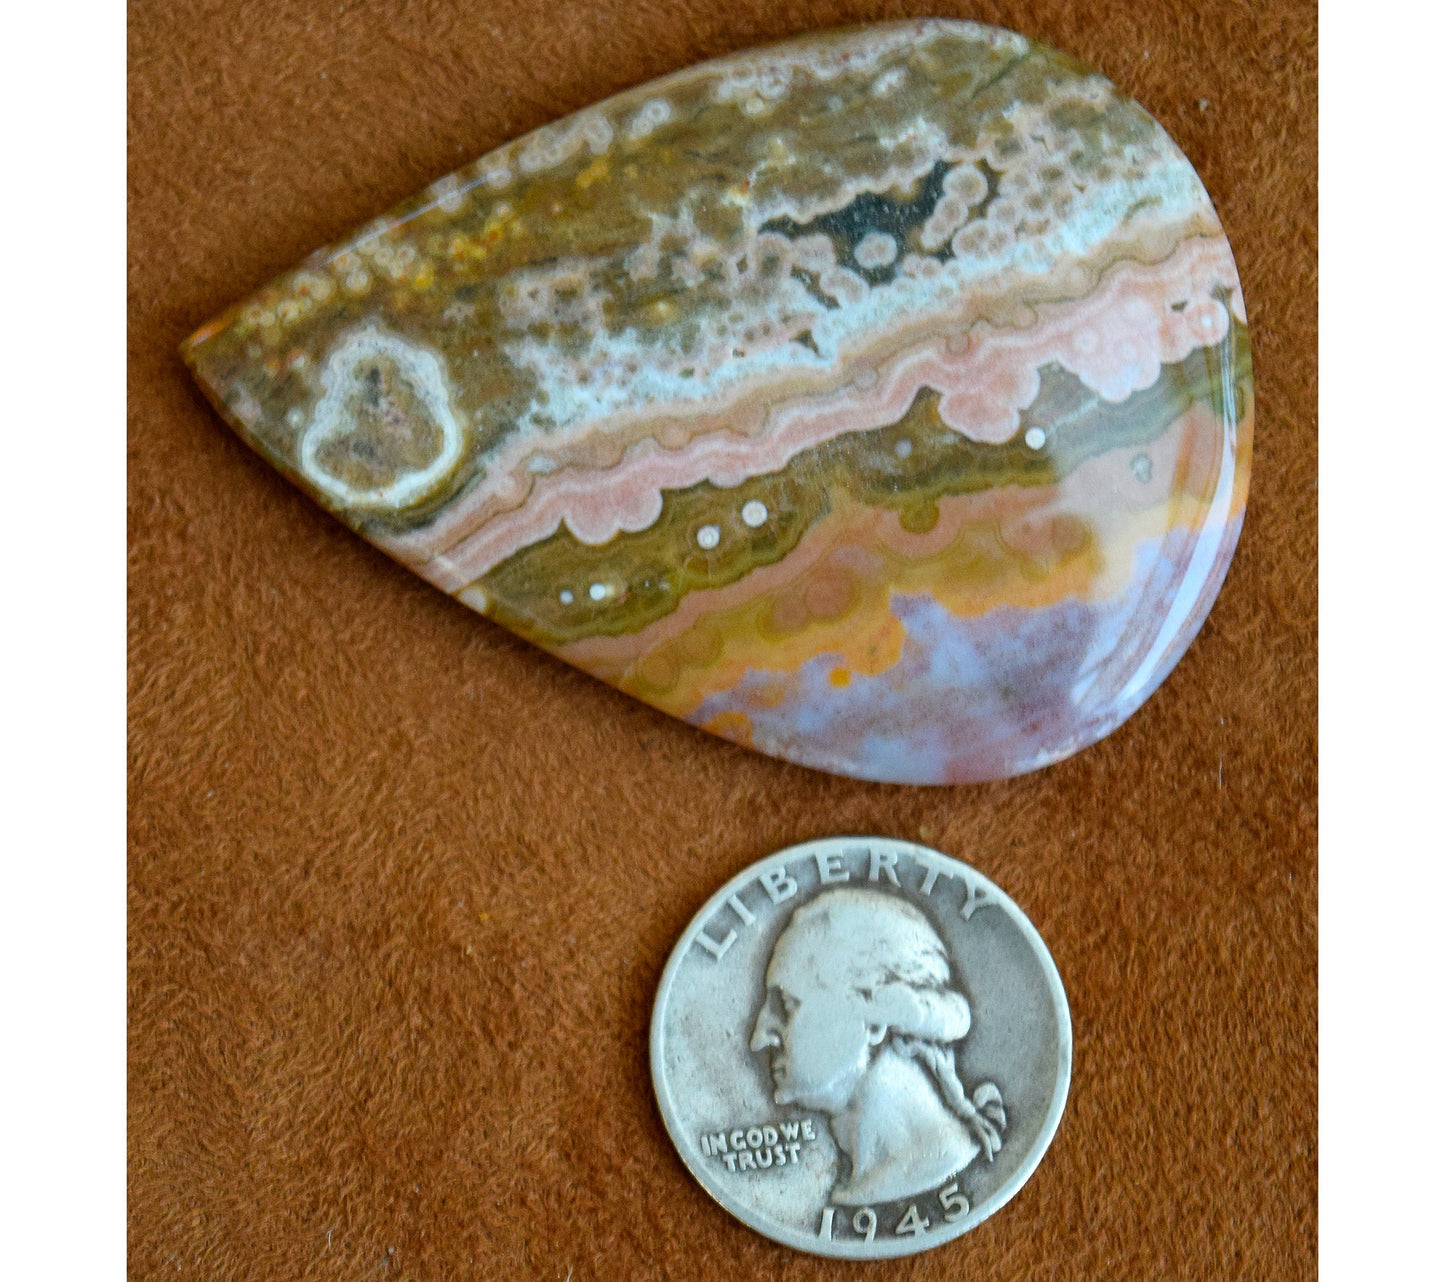 EXTREMELY RARE! HUGE Ocean Jasper collector&#39;s gem from decades ago! Stone #4 of 6